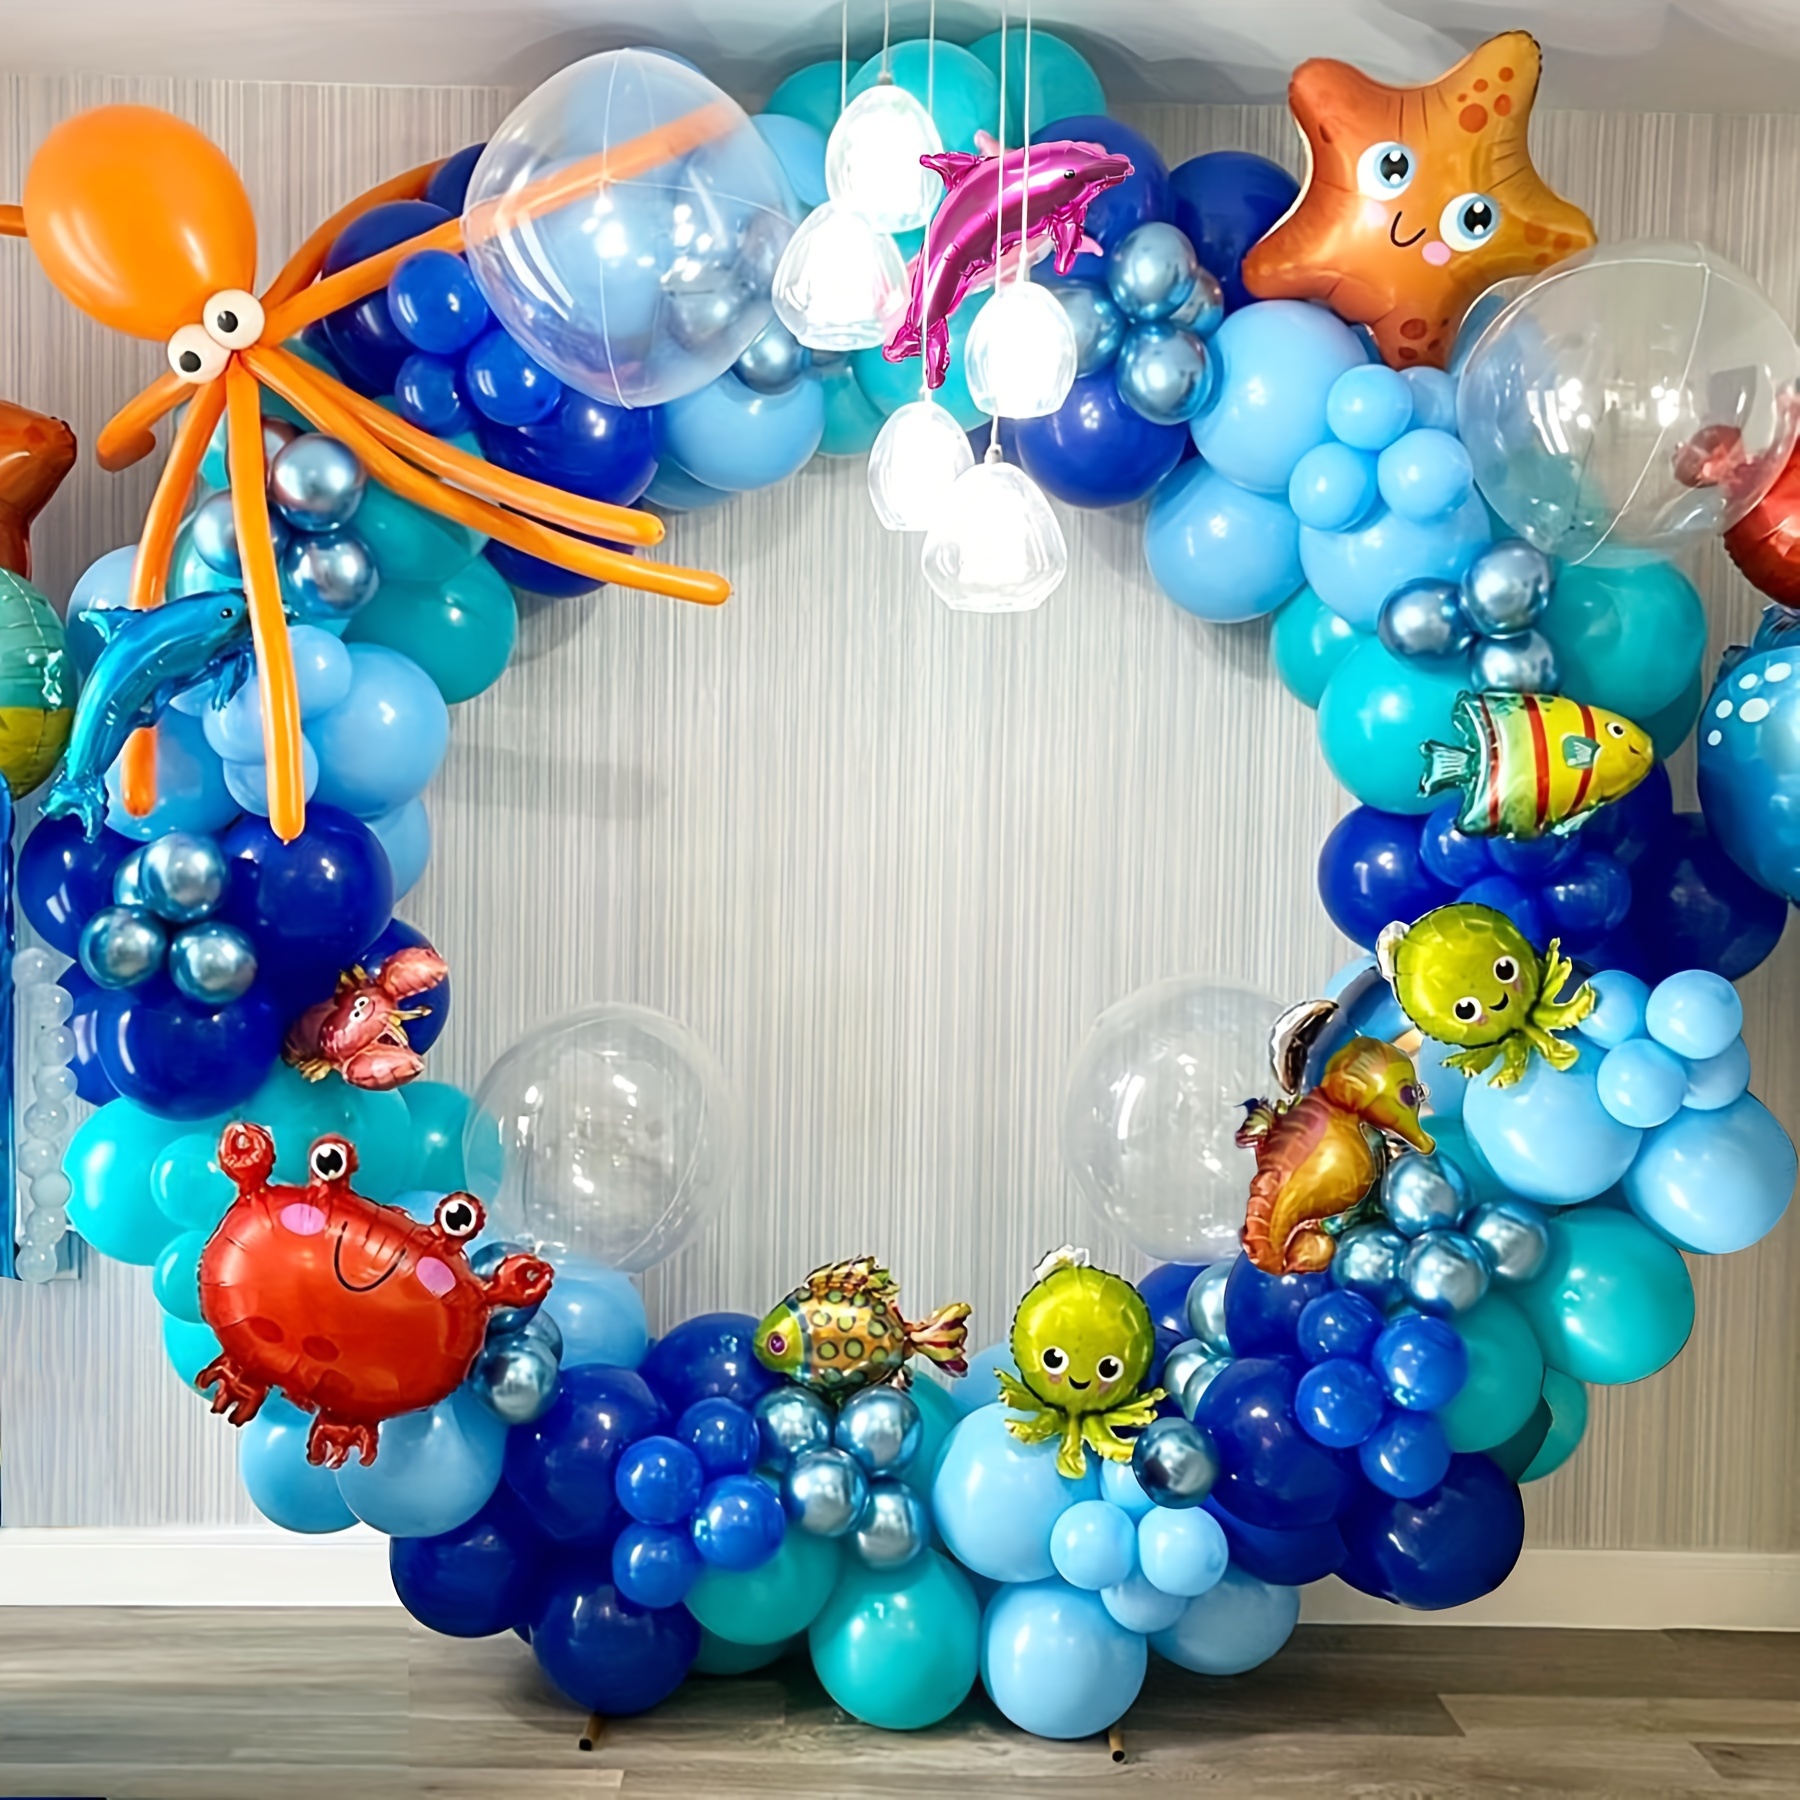  Shark Balloons, 7Pcs Shark Birthday Number Mylar Foil Balloons,  Ocean Animals Birthday Party Supplies for Ocean Theme 1st Baby Shower Birthday  Party Decorations : Toys & Games